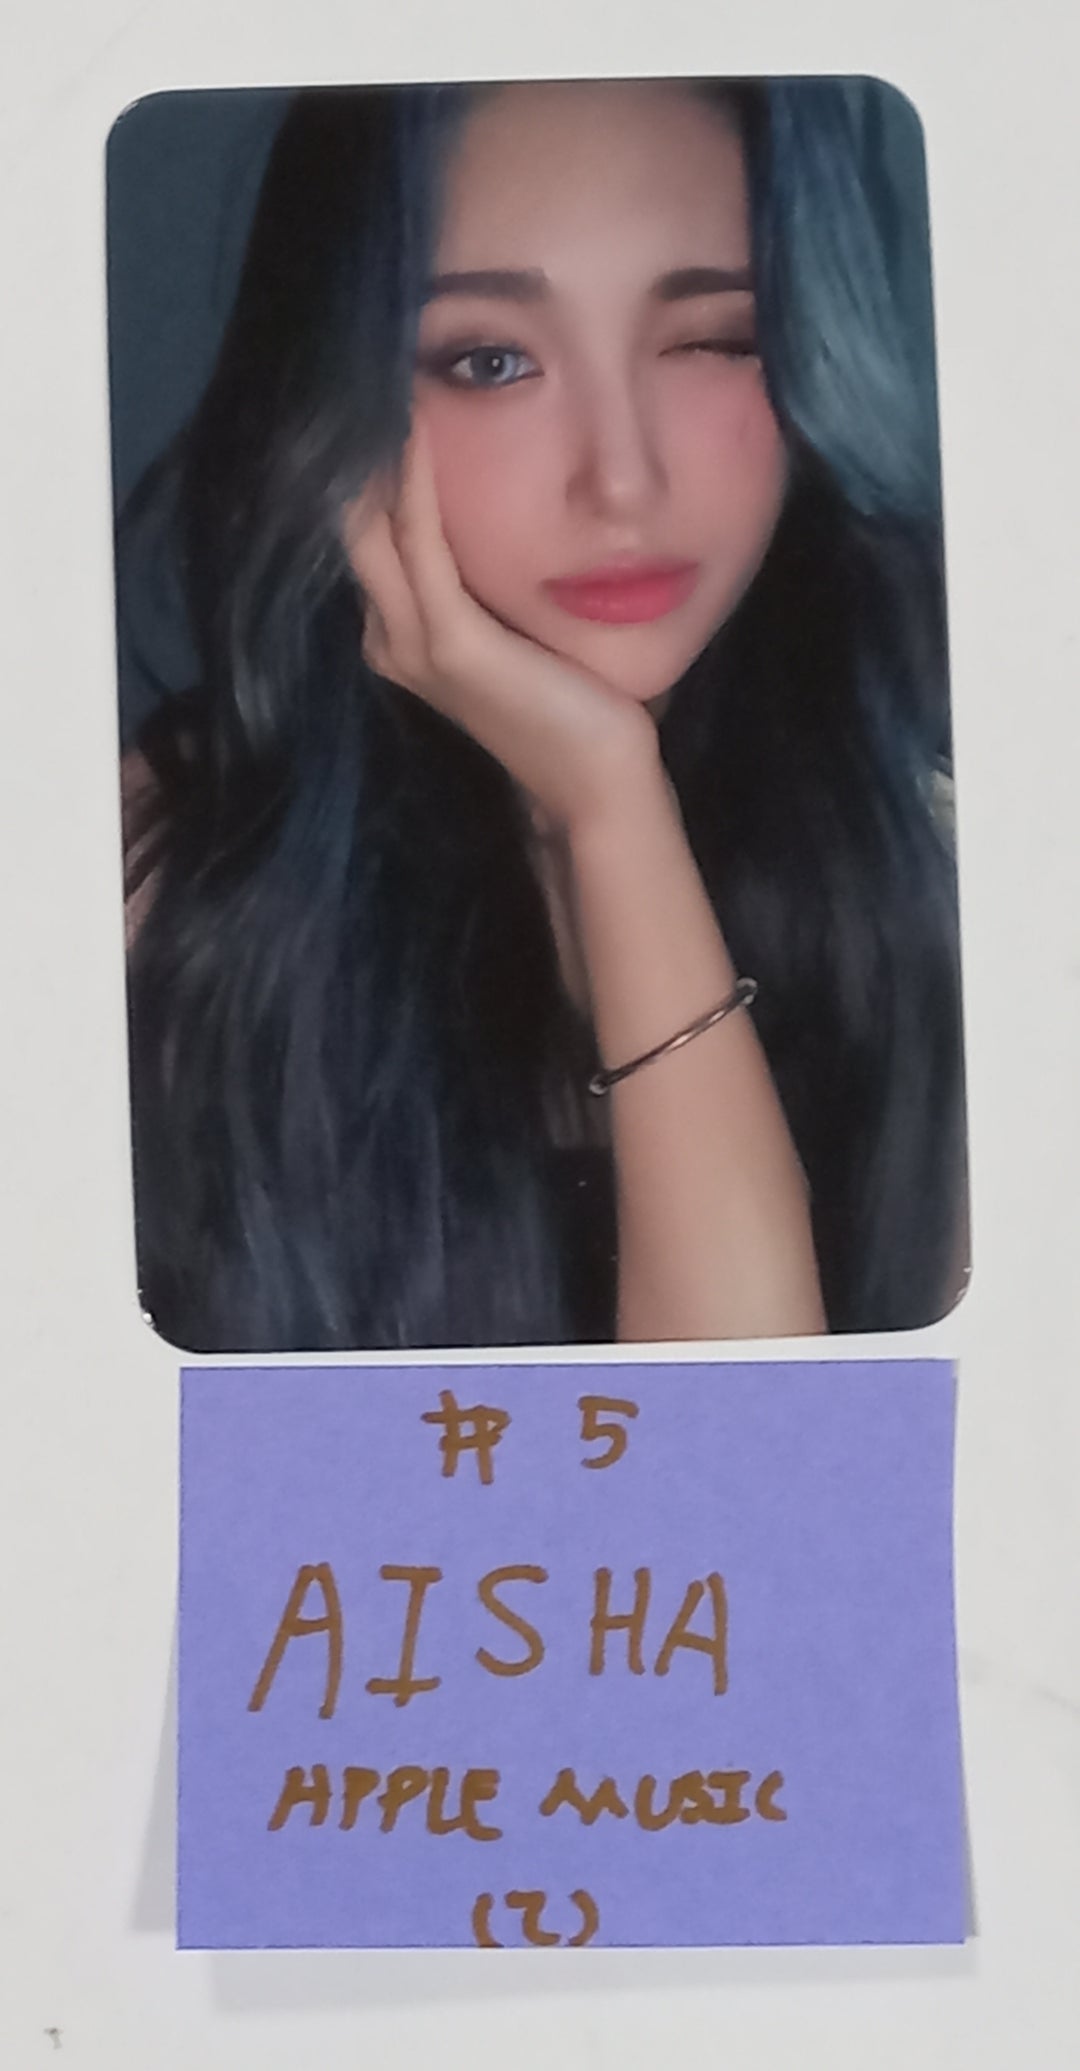 Everglow "ALL MY GIRLS" - Apple Music Pre-Order Benefit Photocard [23.08.21]